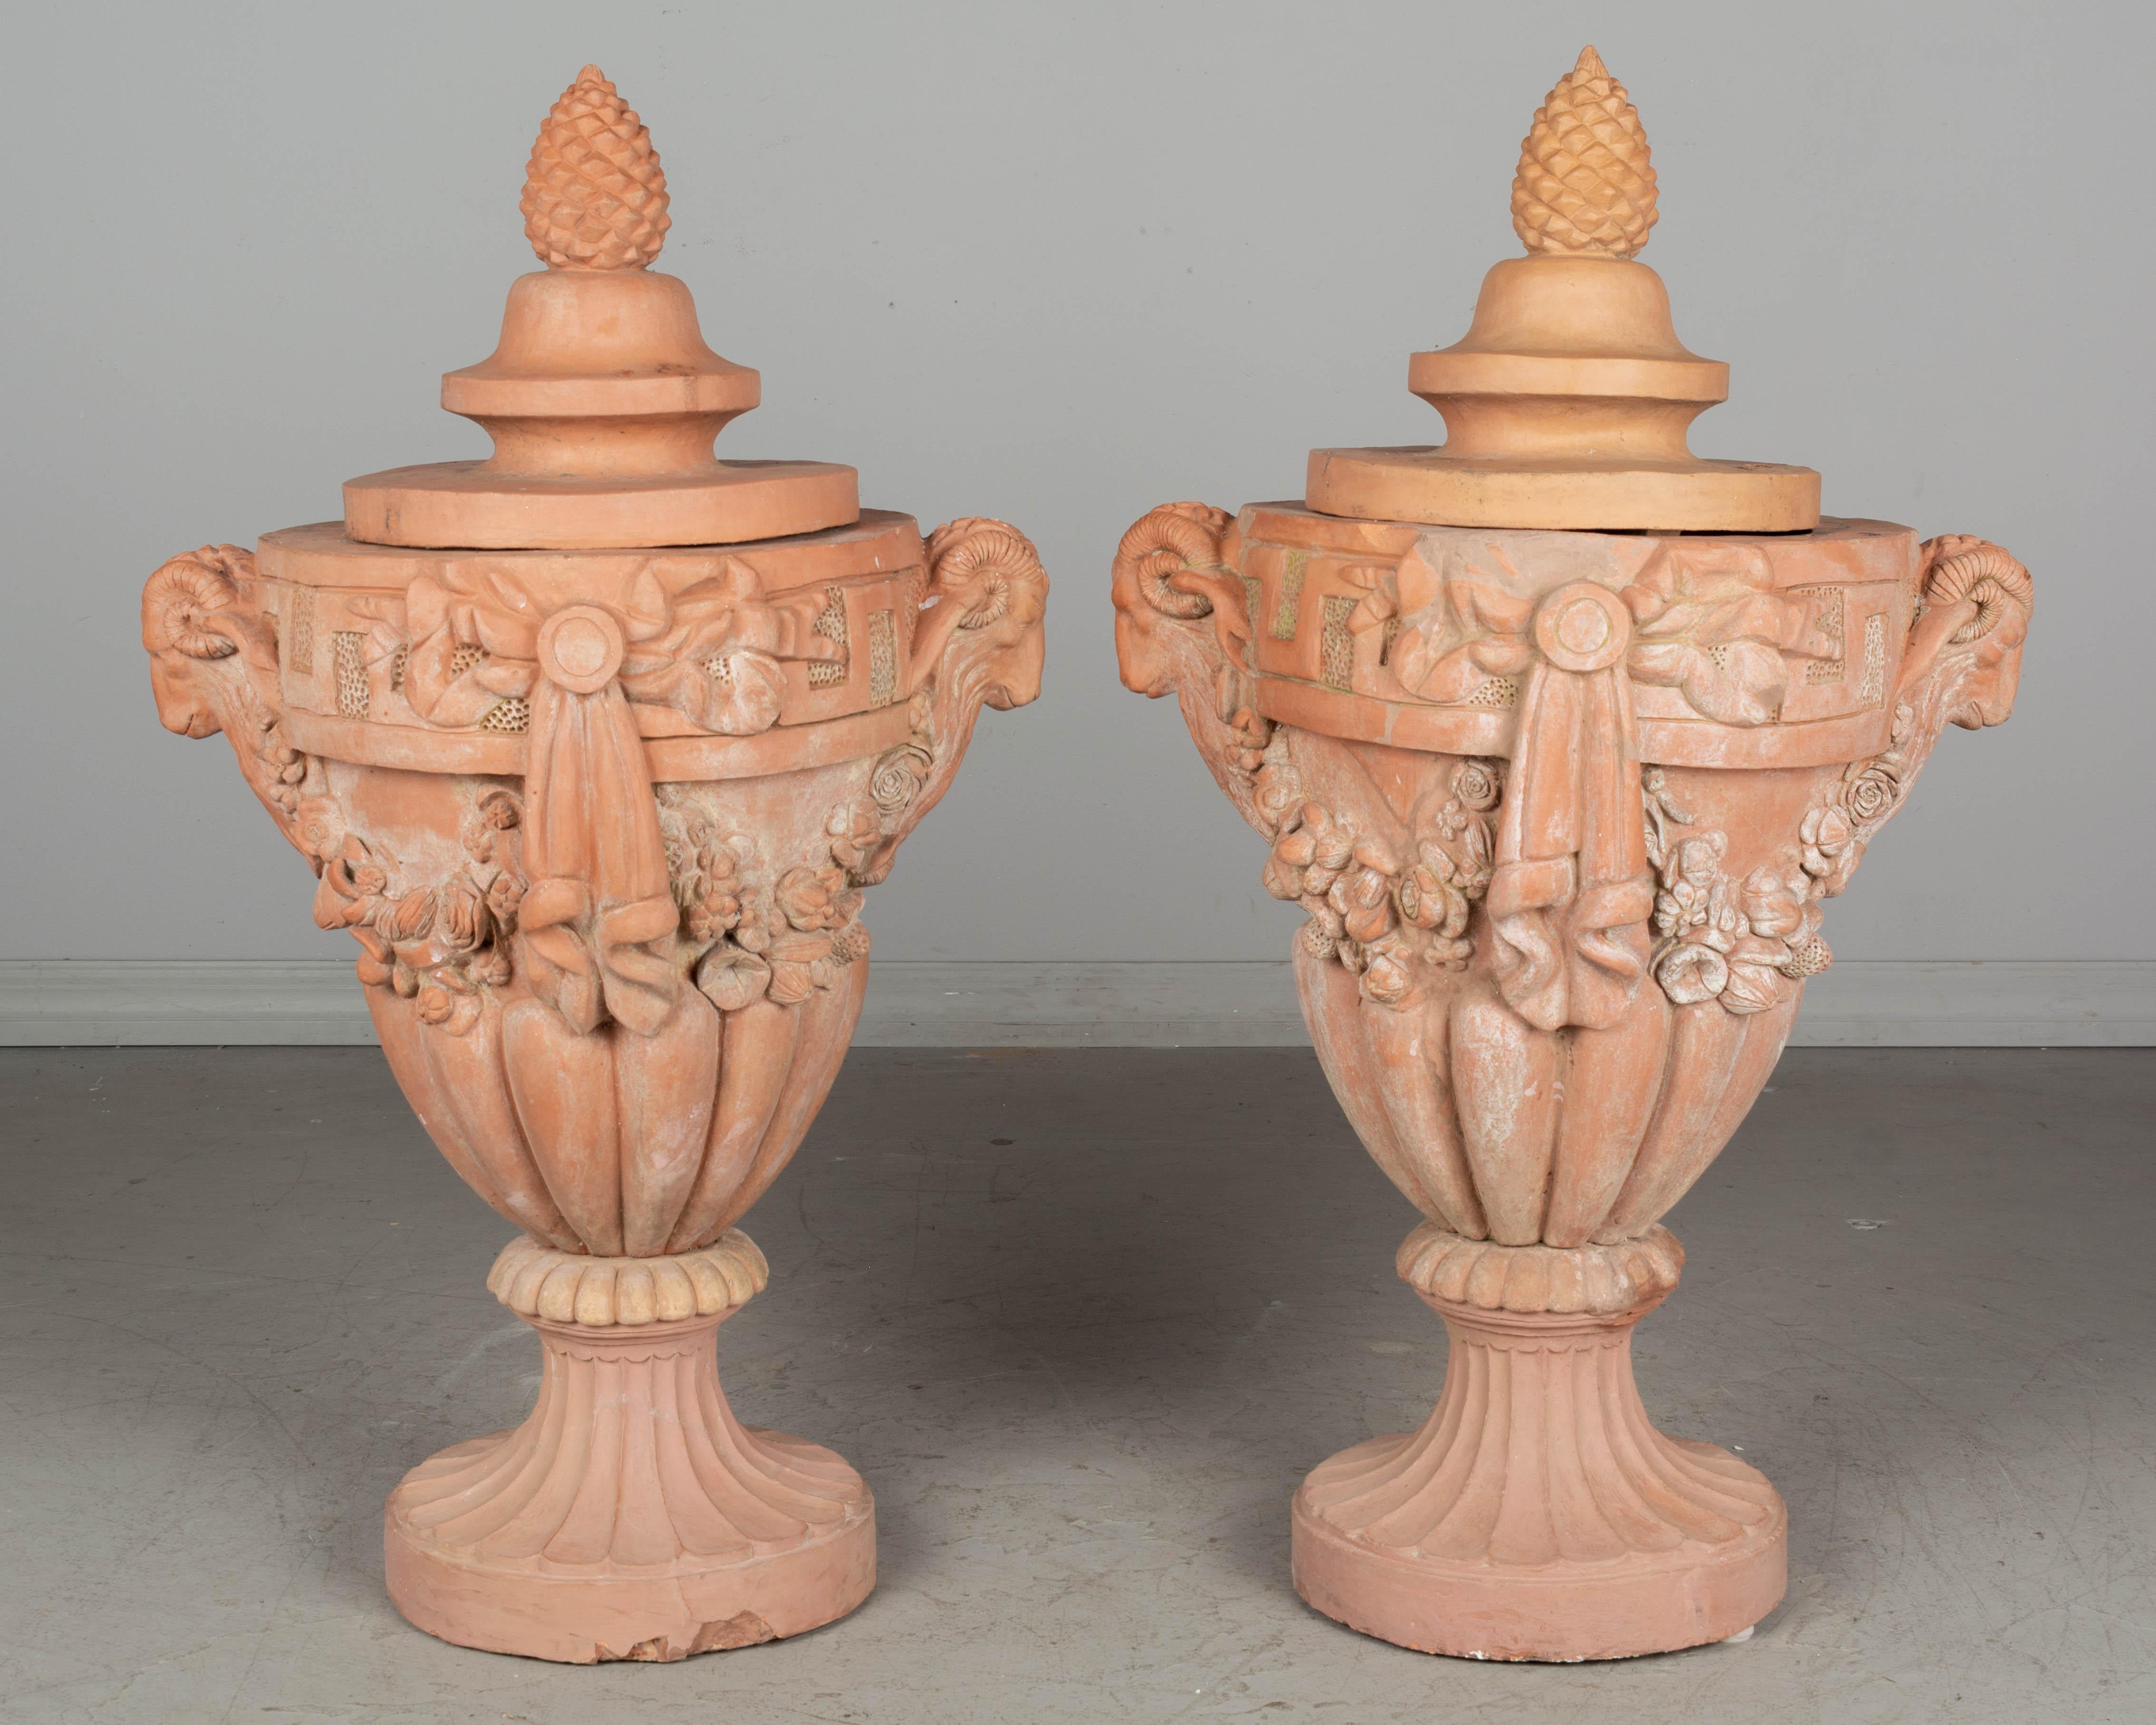 A pair of early 20th Century French Terracotta garden urns from the Toulouse Region. Nice casting with fine decorative details including large ram head handles, flower garlands with bows, and pinecone finials on the lids. Both urns have been